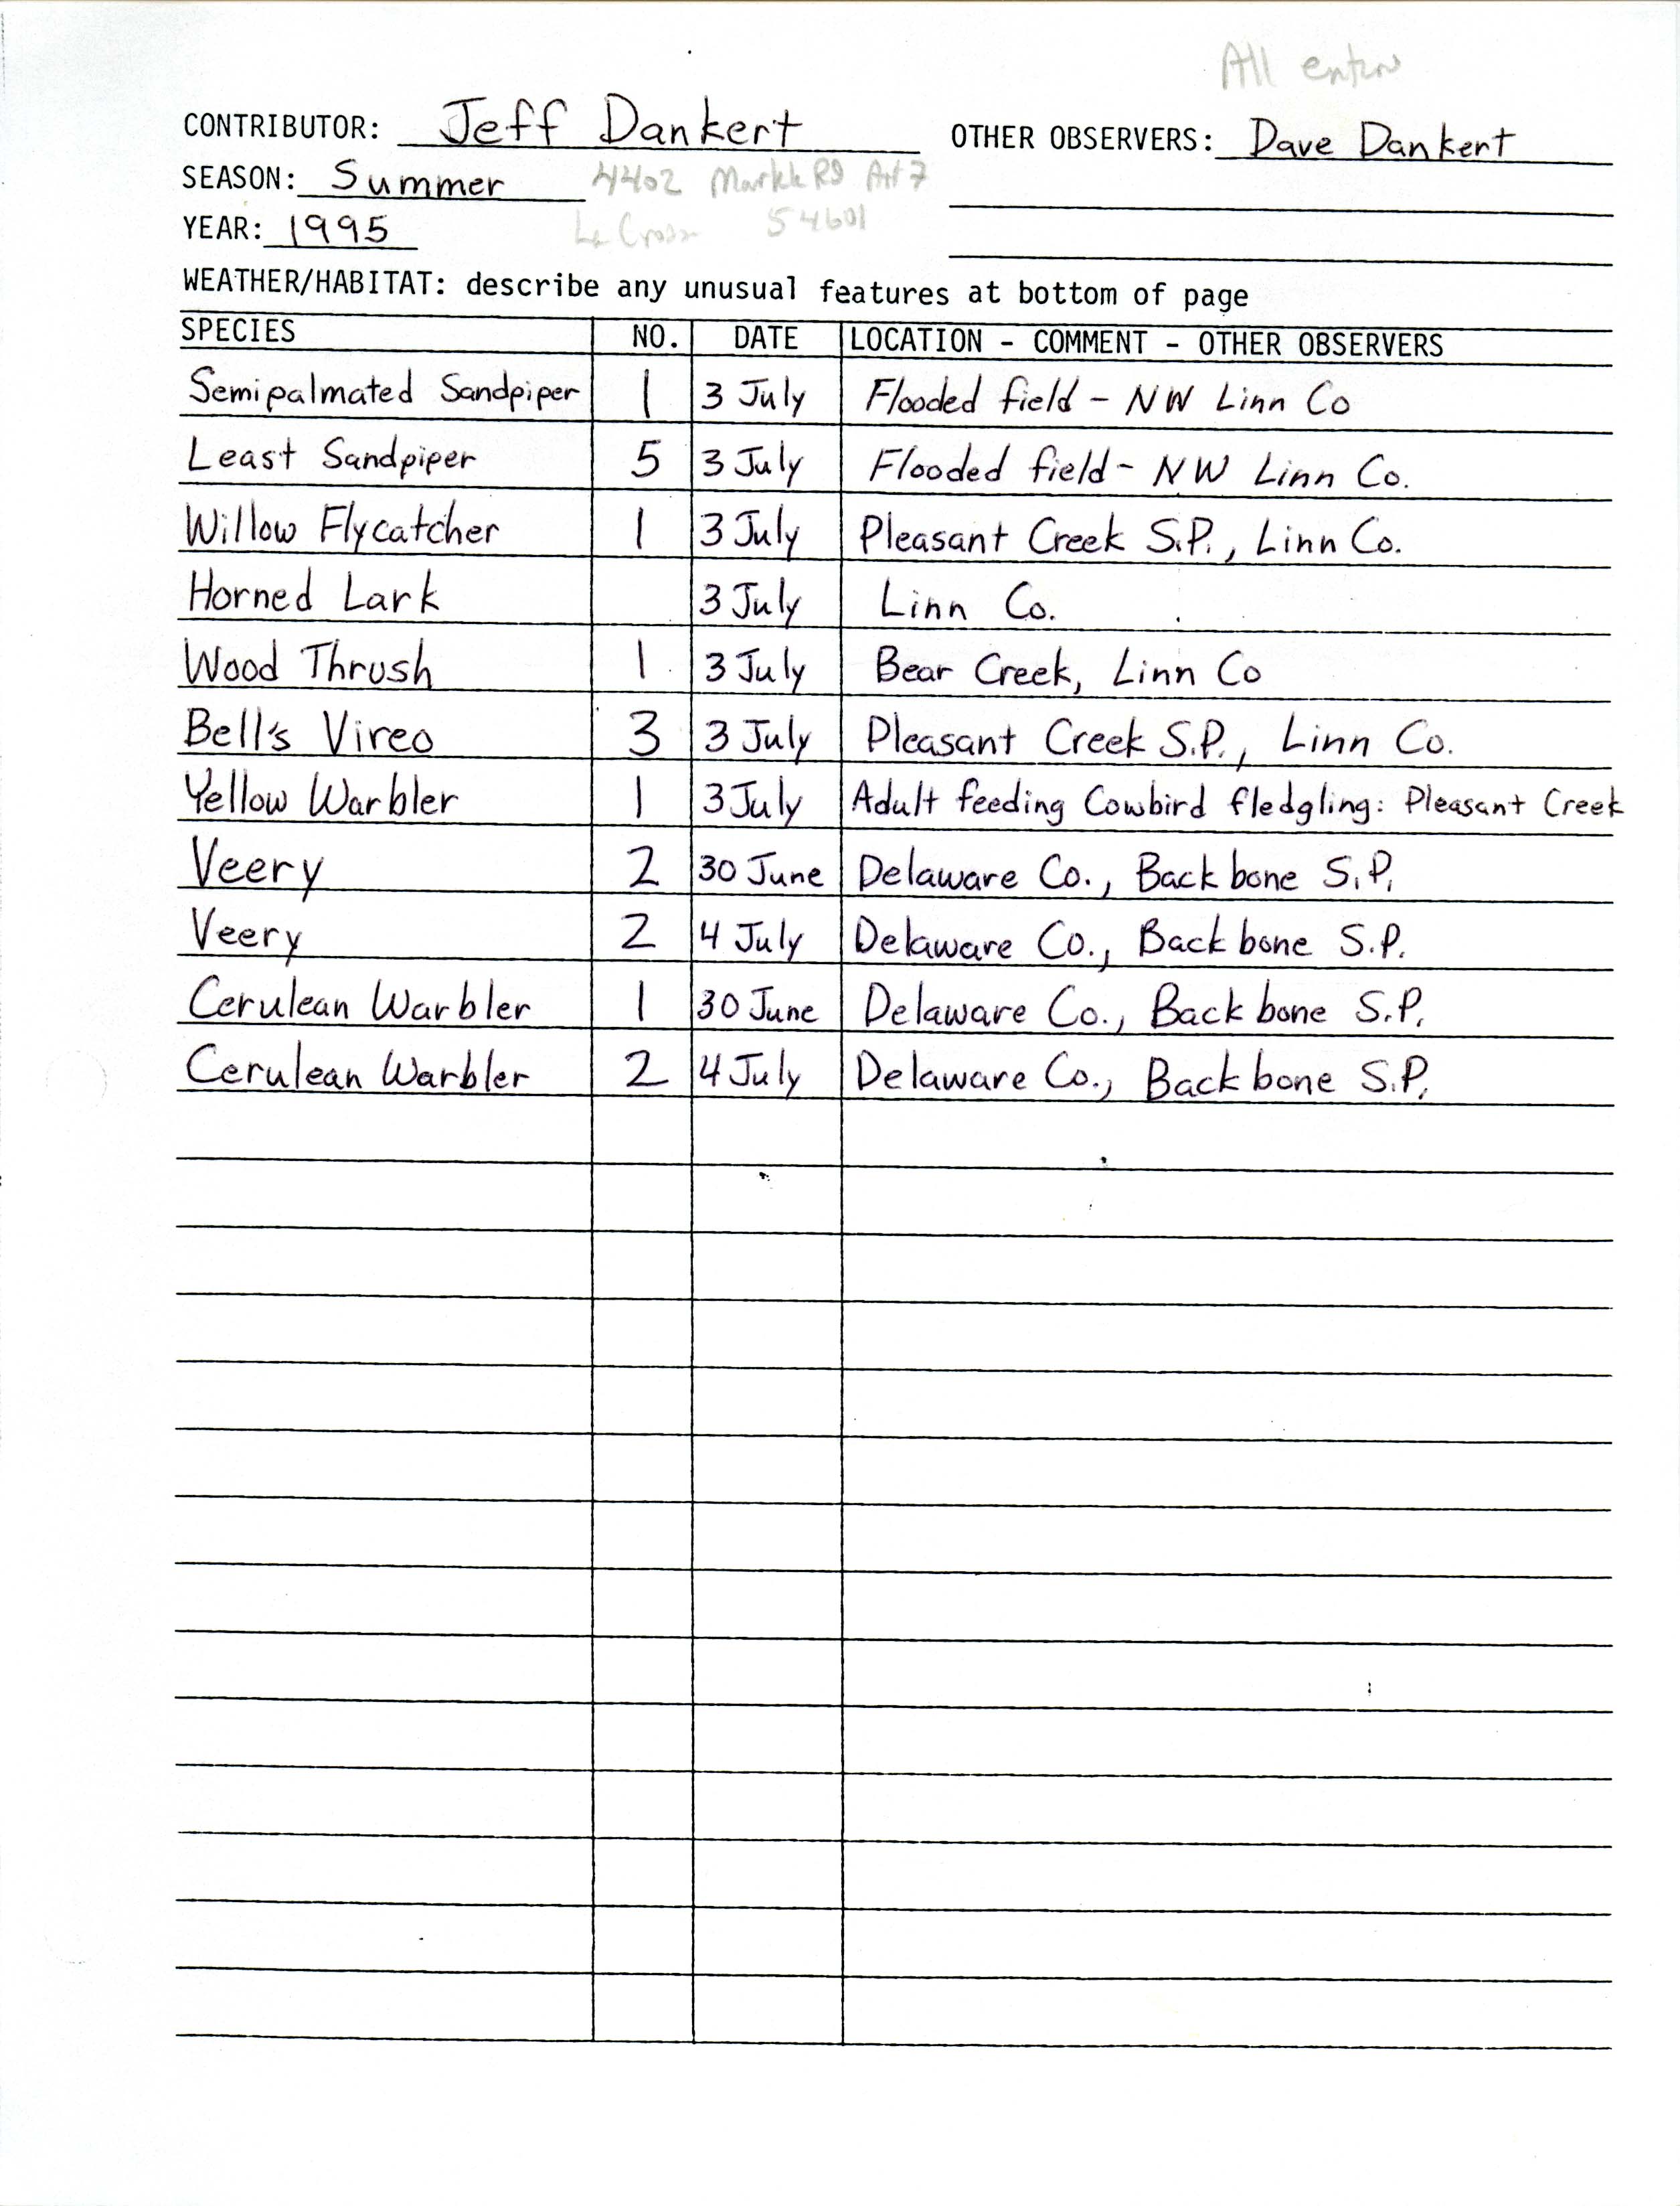 Field reports form for submitting seasonal observations of Iowa birds, summer 1995, Jeff Dankert